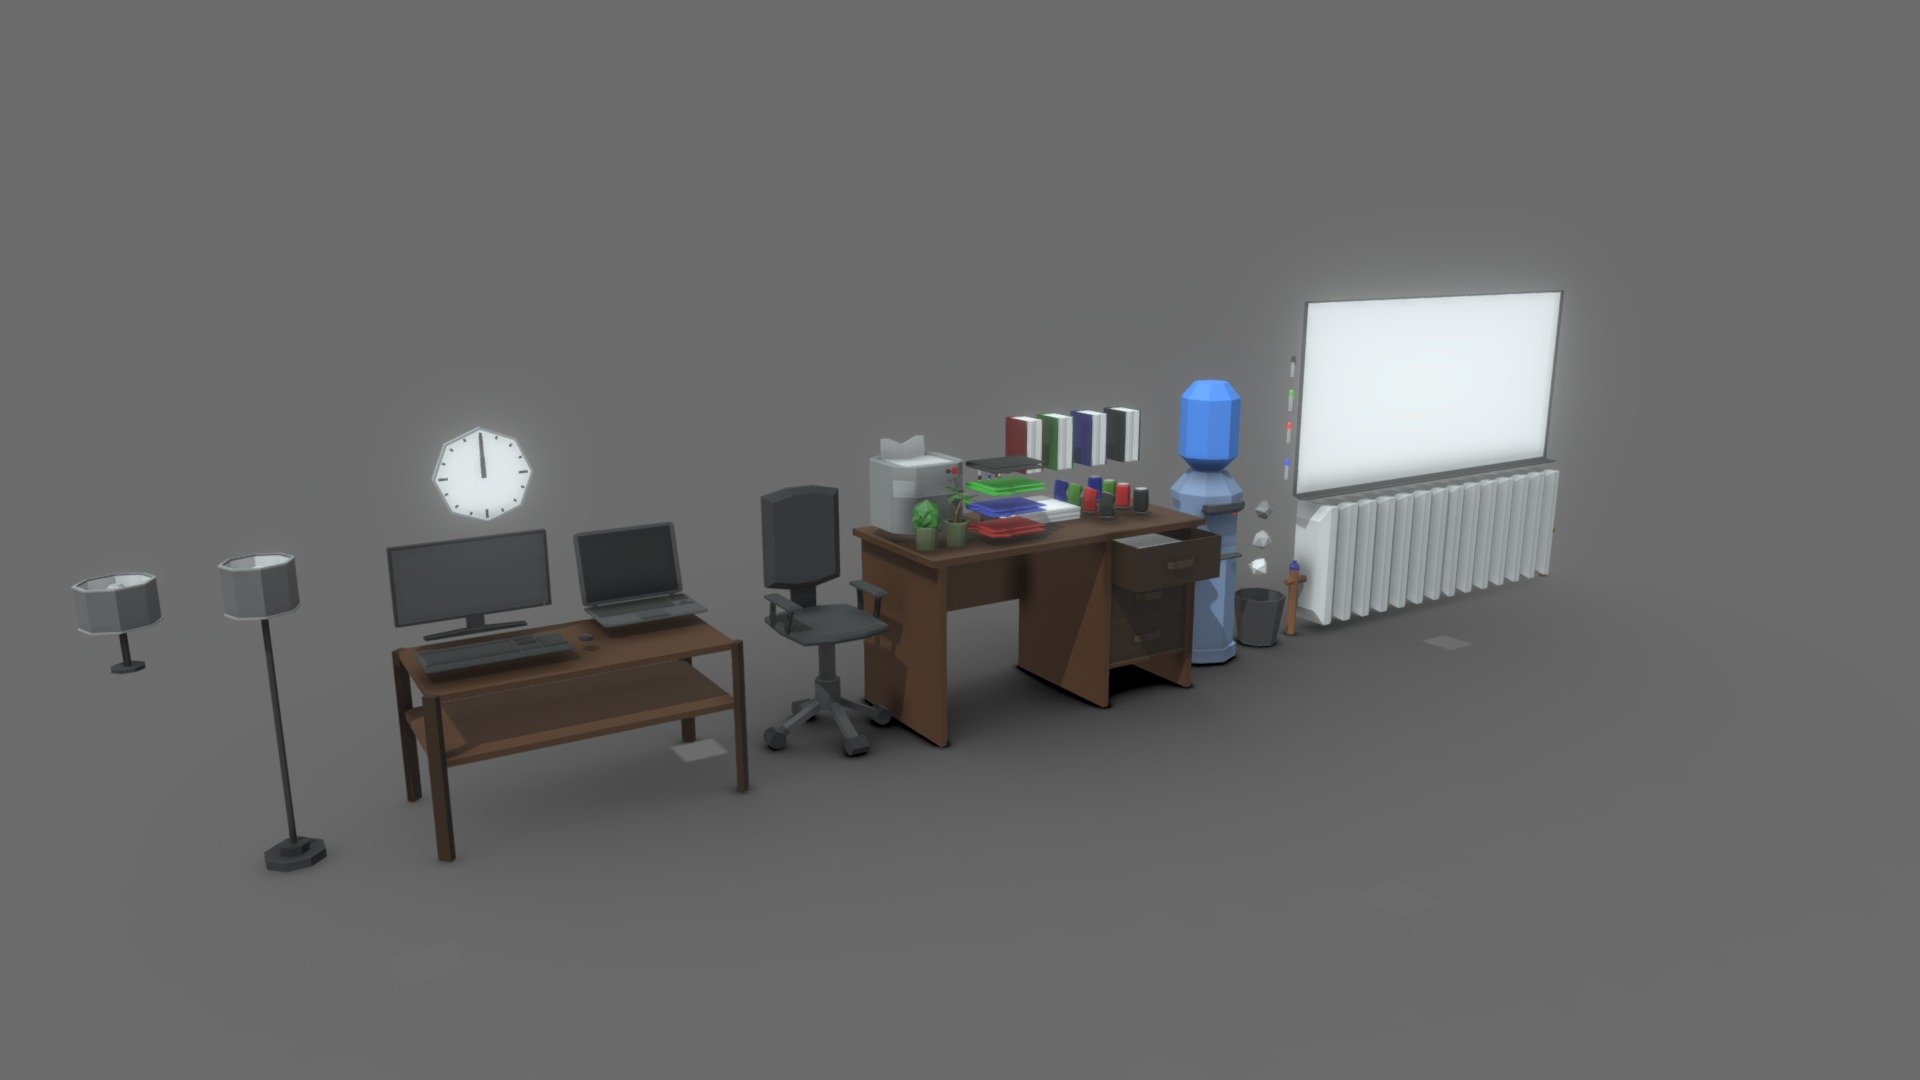 3D model office trash can VR / AR / low-poly